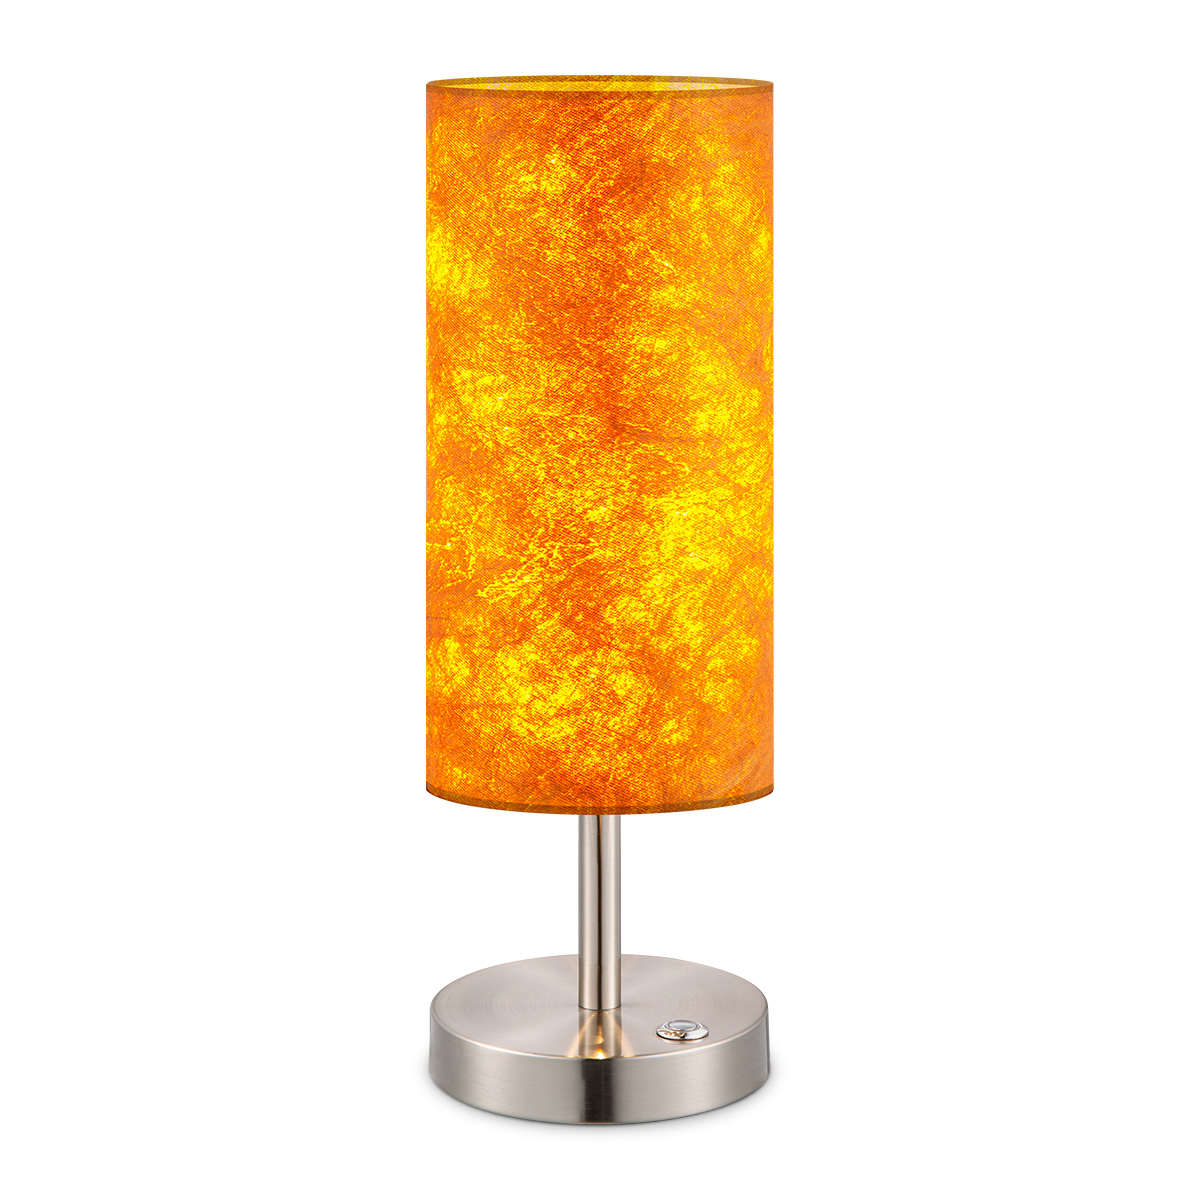 Tangla lighting - TLT7640-01AM - LED table lamp 1 Light - metal and fabric in brown and mat satin - rechargeable - E27